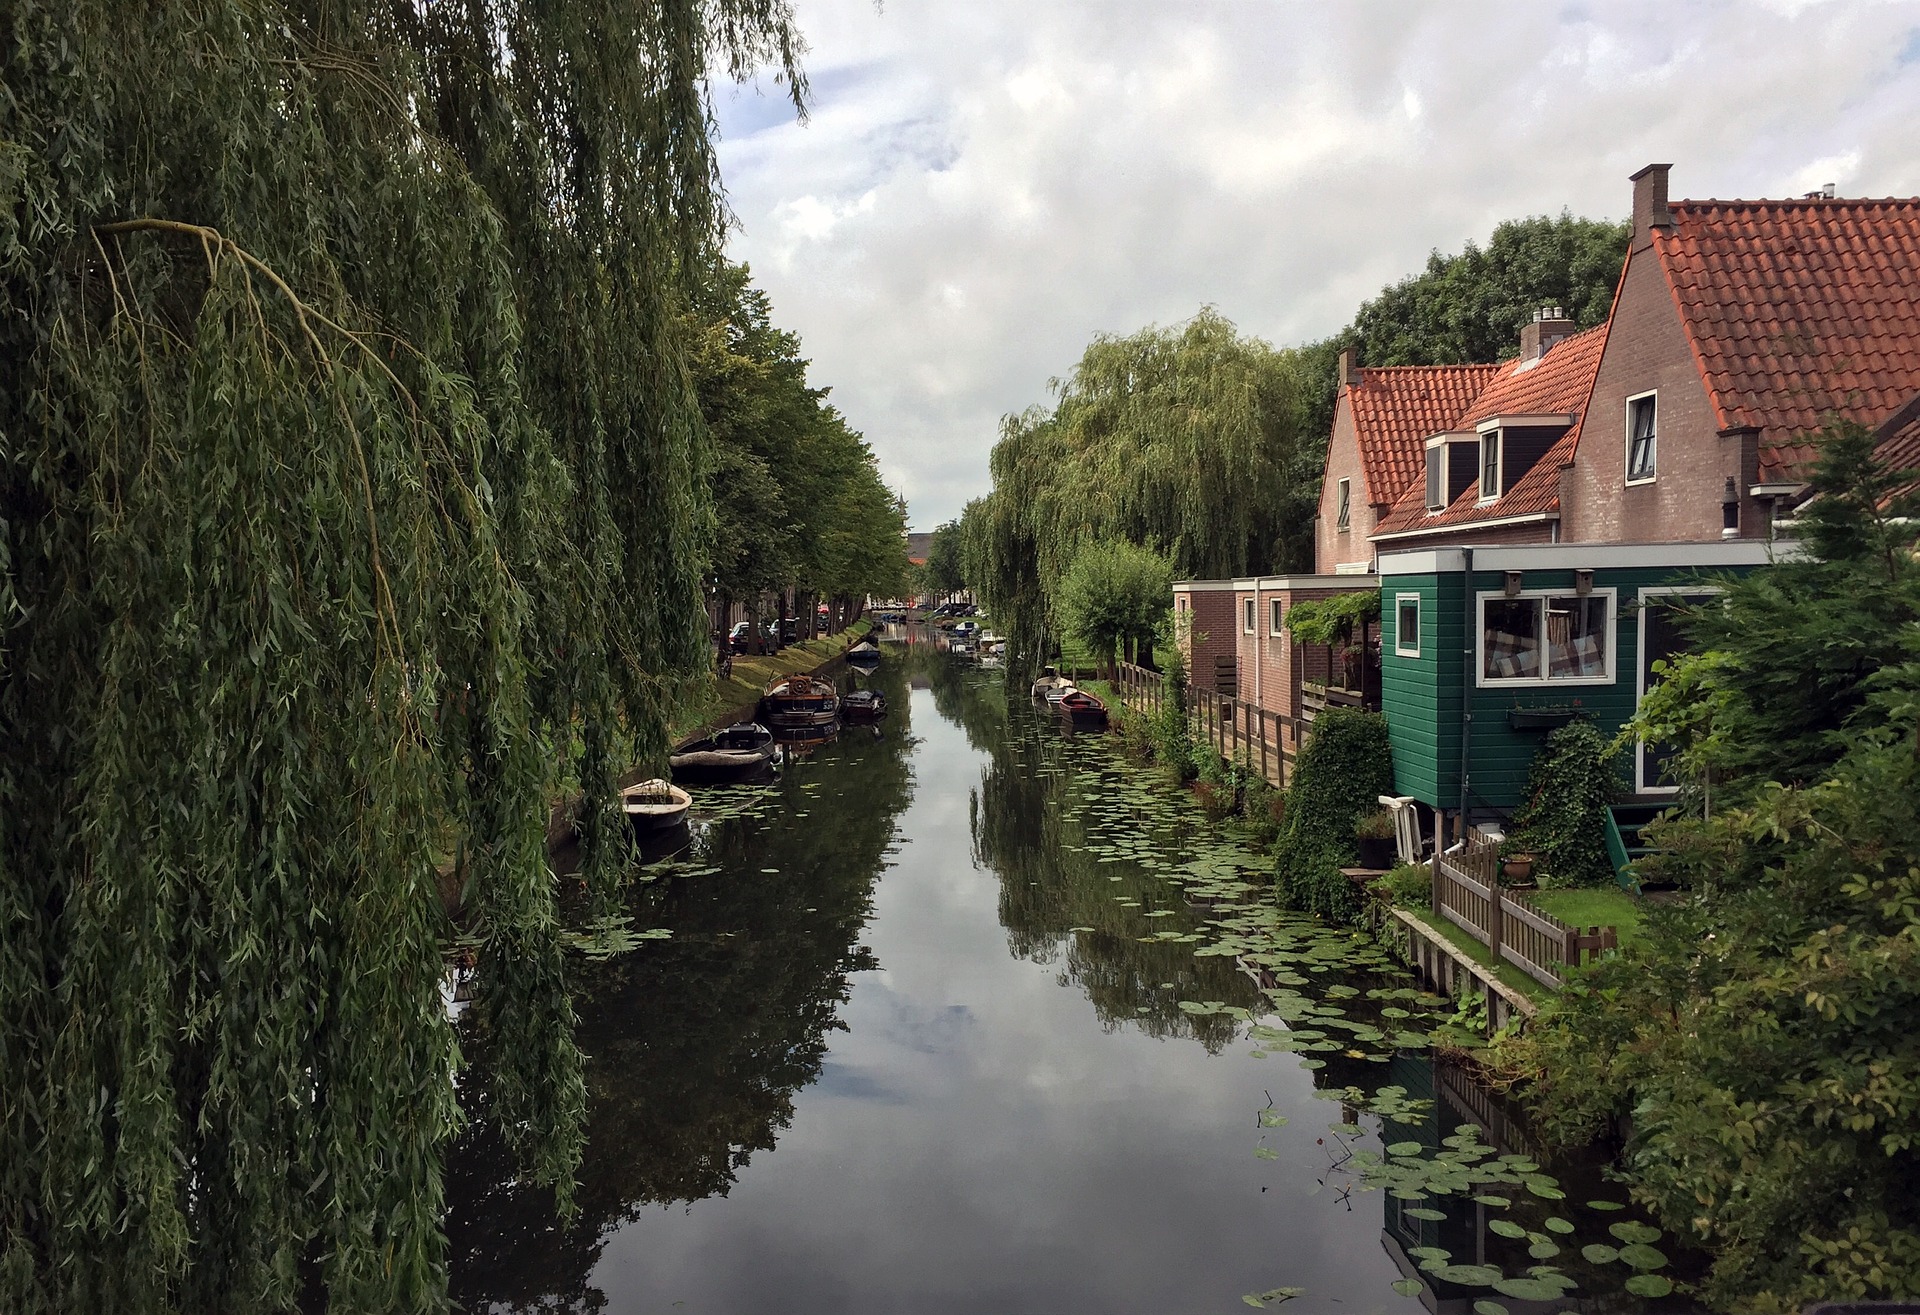 Edam day trips from Amsterdam